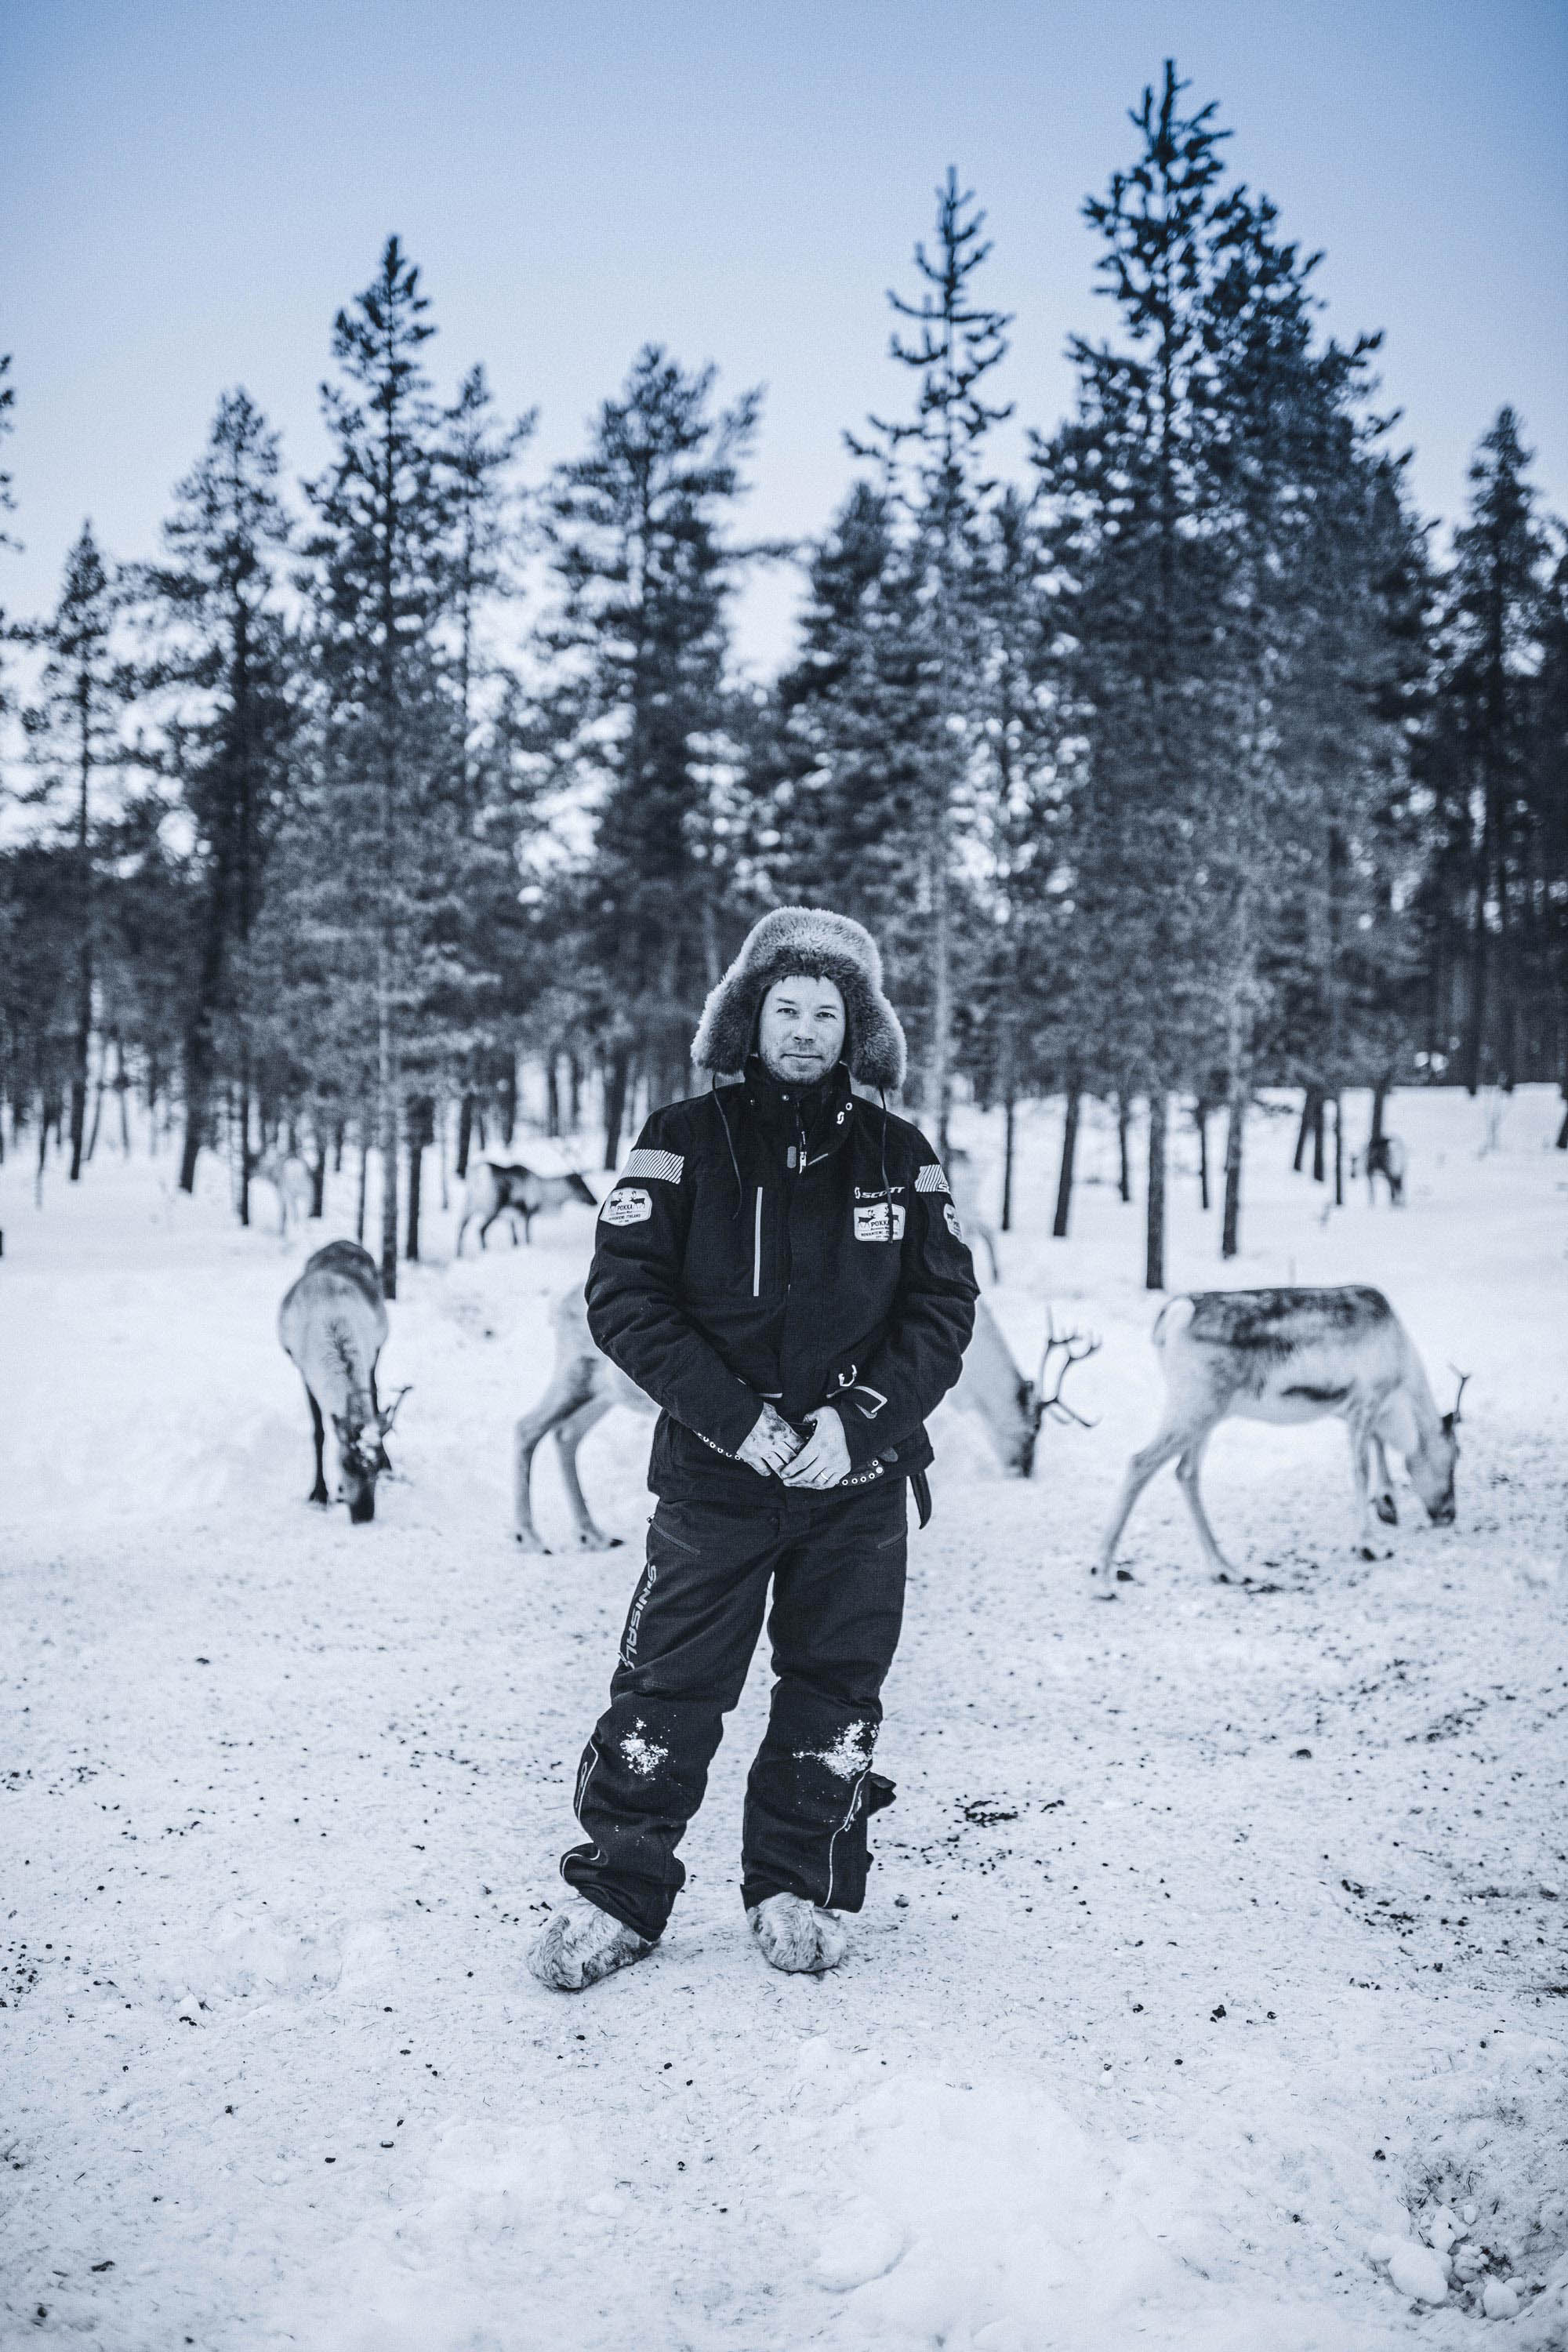 Herdsman in snowsuit, warm fur hat and boots with reindeer behind him